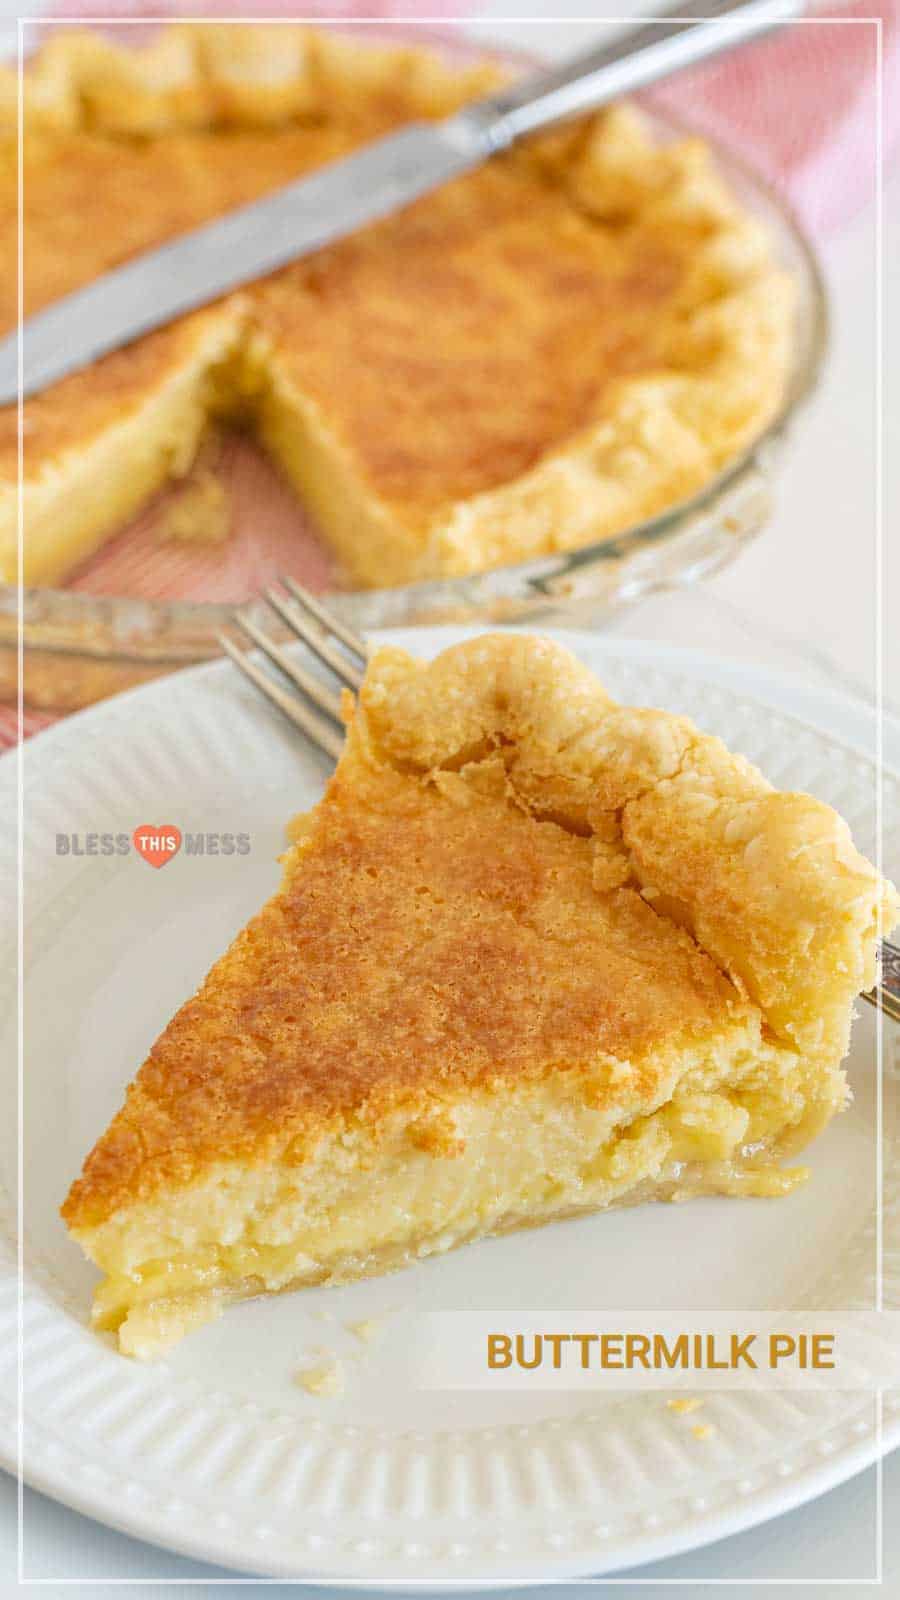 Old fashioned buttermilk pie is an easy pie recipe that produces a rich, thick, sweet custard-like center when baked. If you're expecting company soon, this buttermilk pie recipe is the best dessert to greet them with! It's one of the simplest pie recipes ever, too, as you just add a quick custard filling to a prepared pie crust and bake for just under an hour! #custardpie #buttermilkpie #homemadepie #easypie #pierecipe #oldfashionedbuttermilkpie #holidaypie #pie